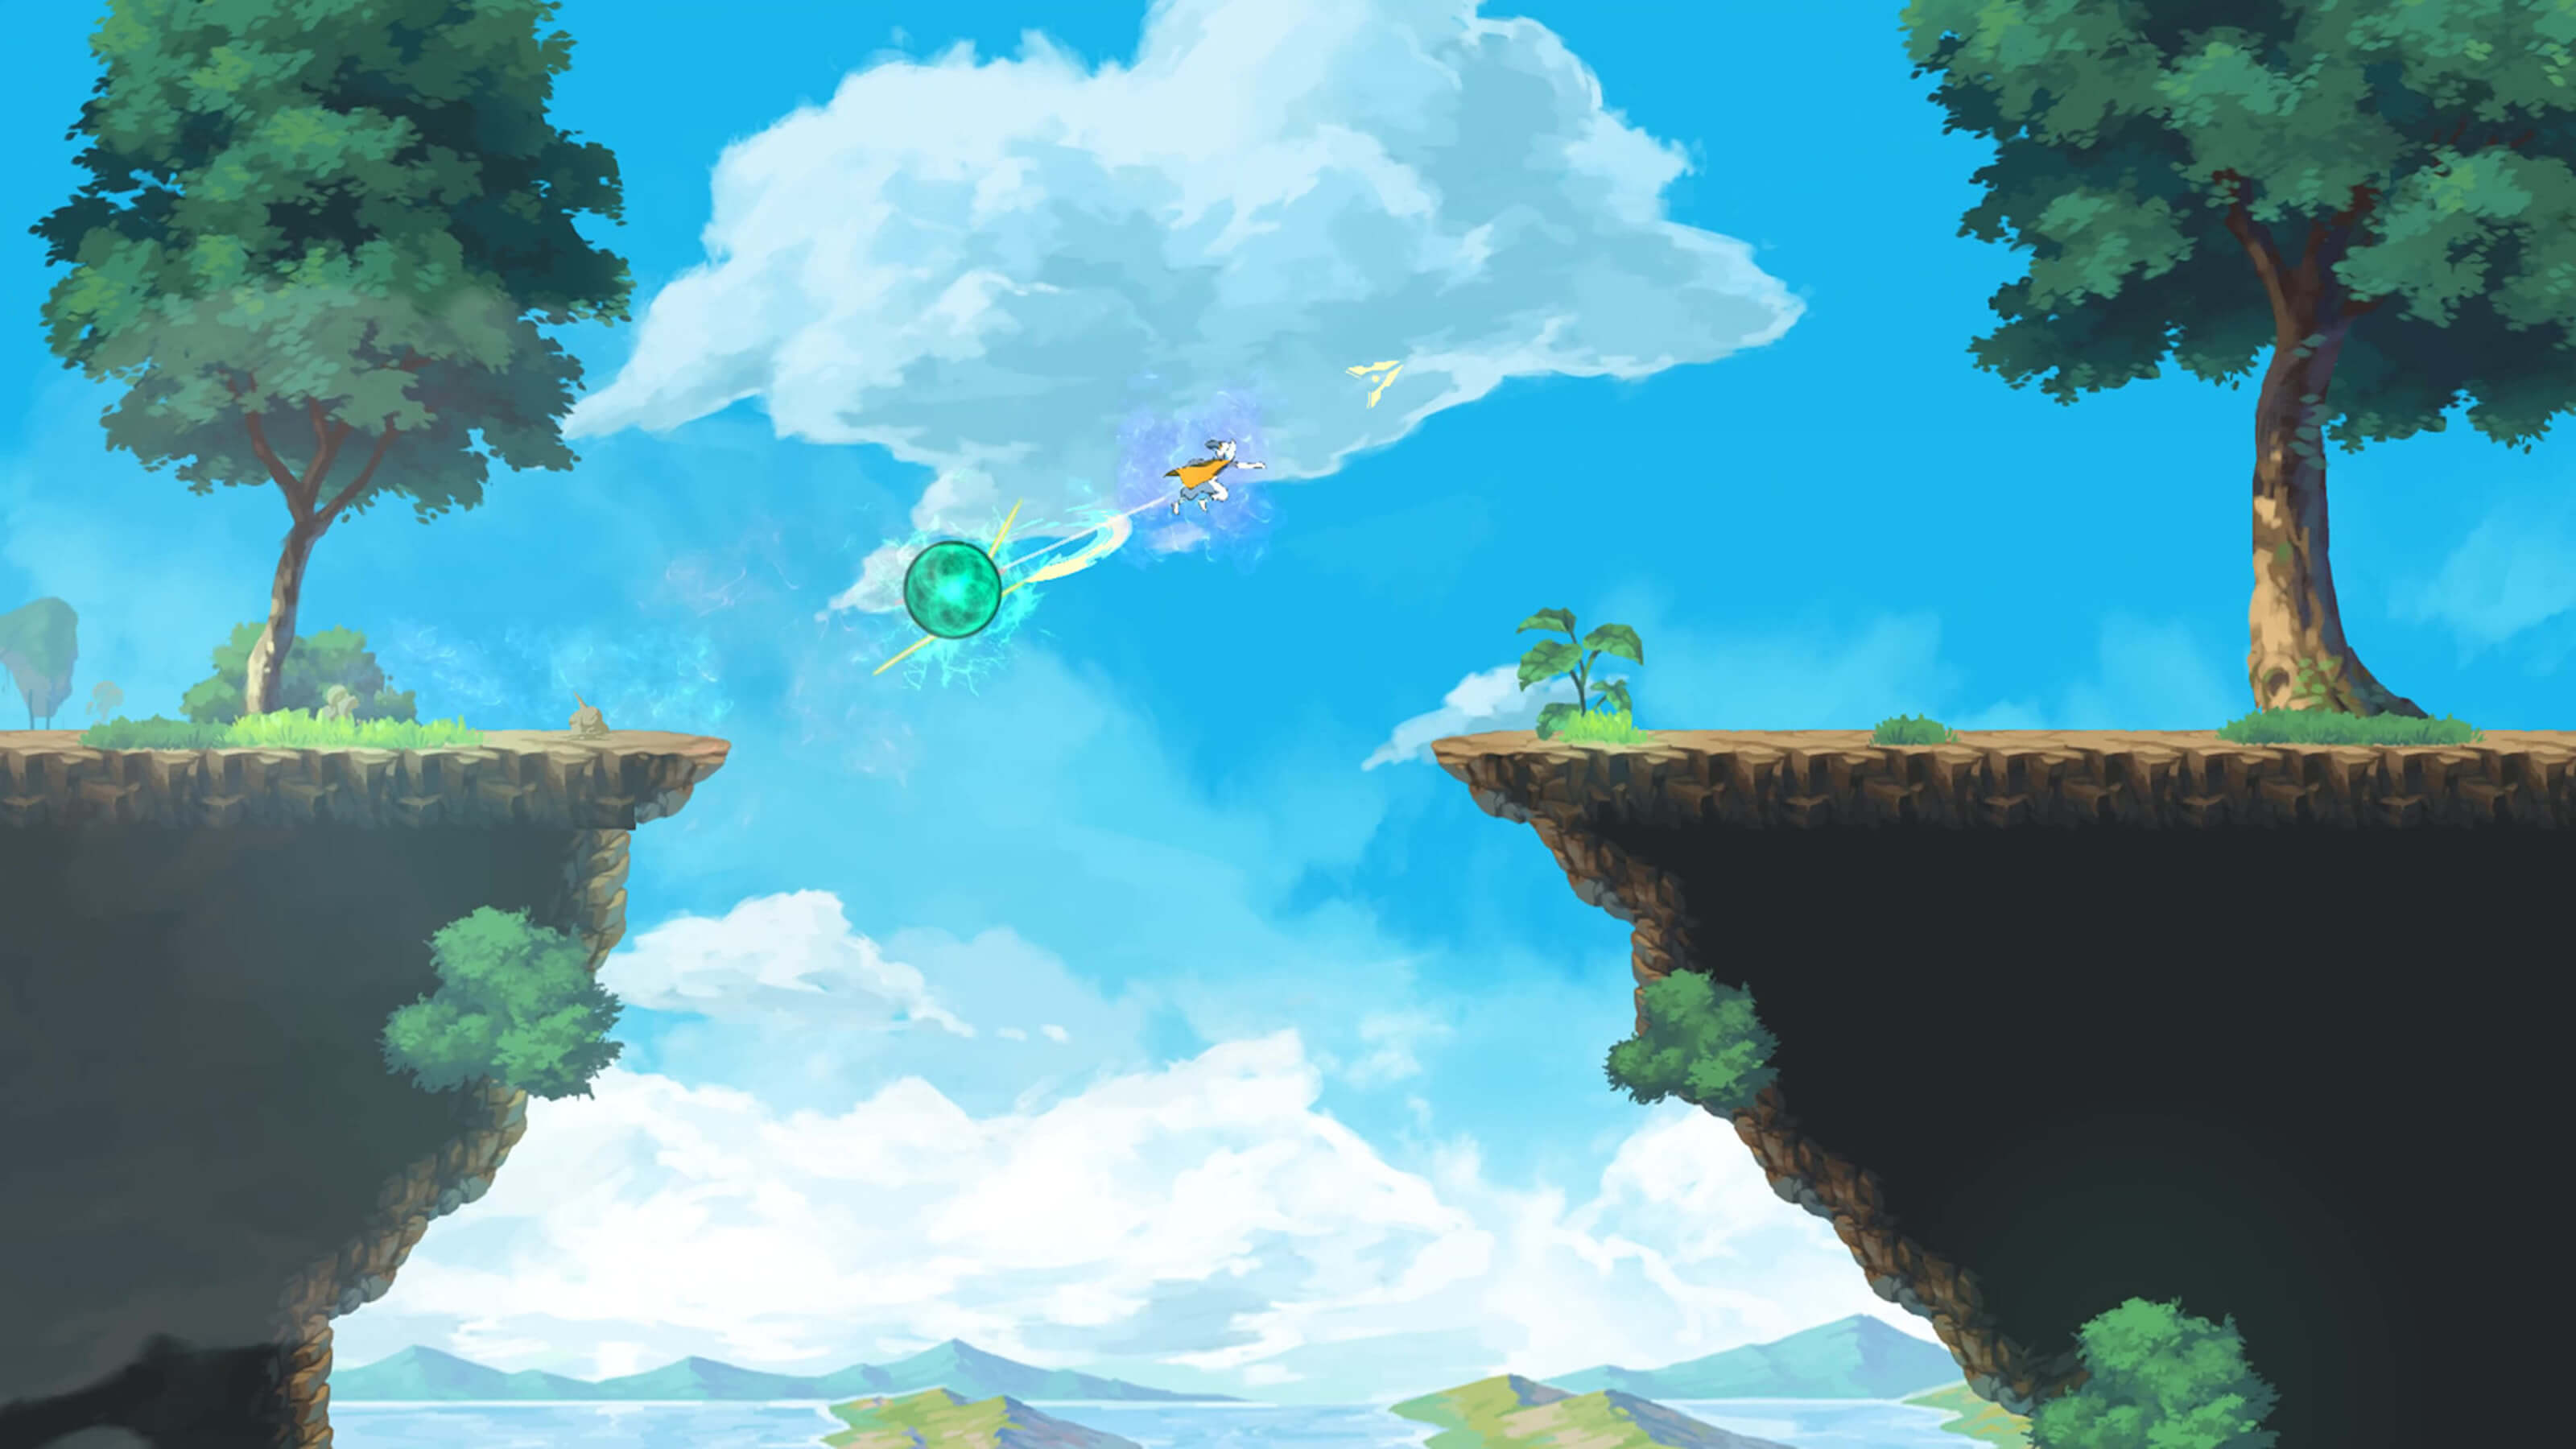 A character leaps over a chasm in the sky